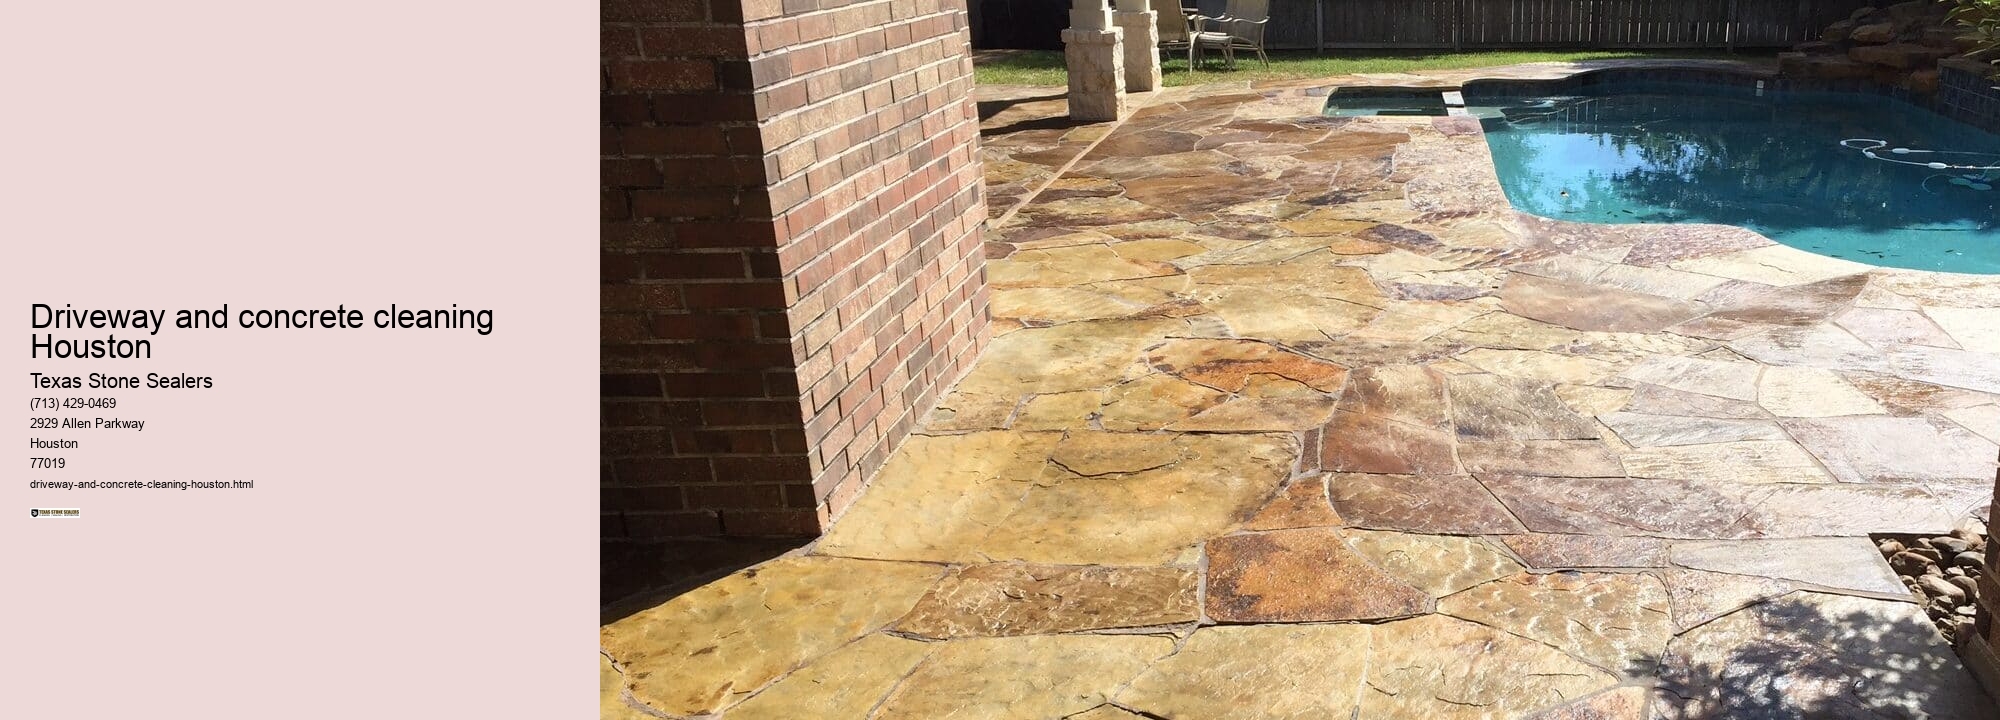 Driveway and concrete cleaning Houston